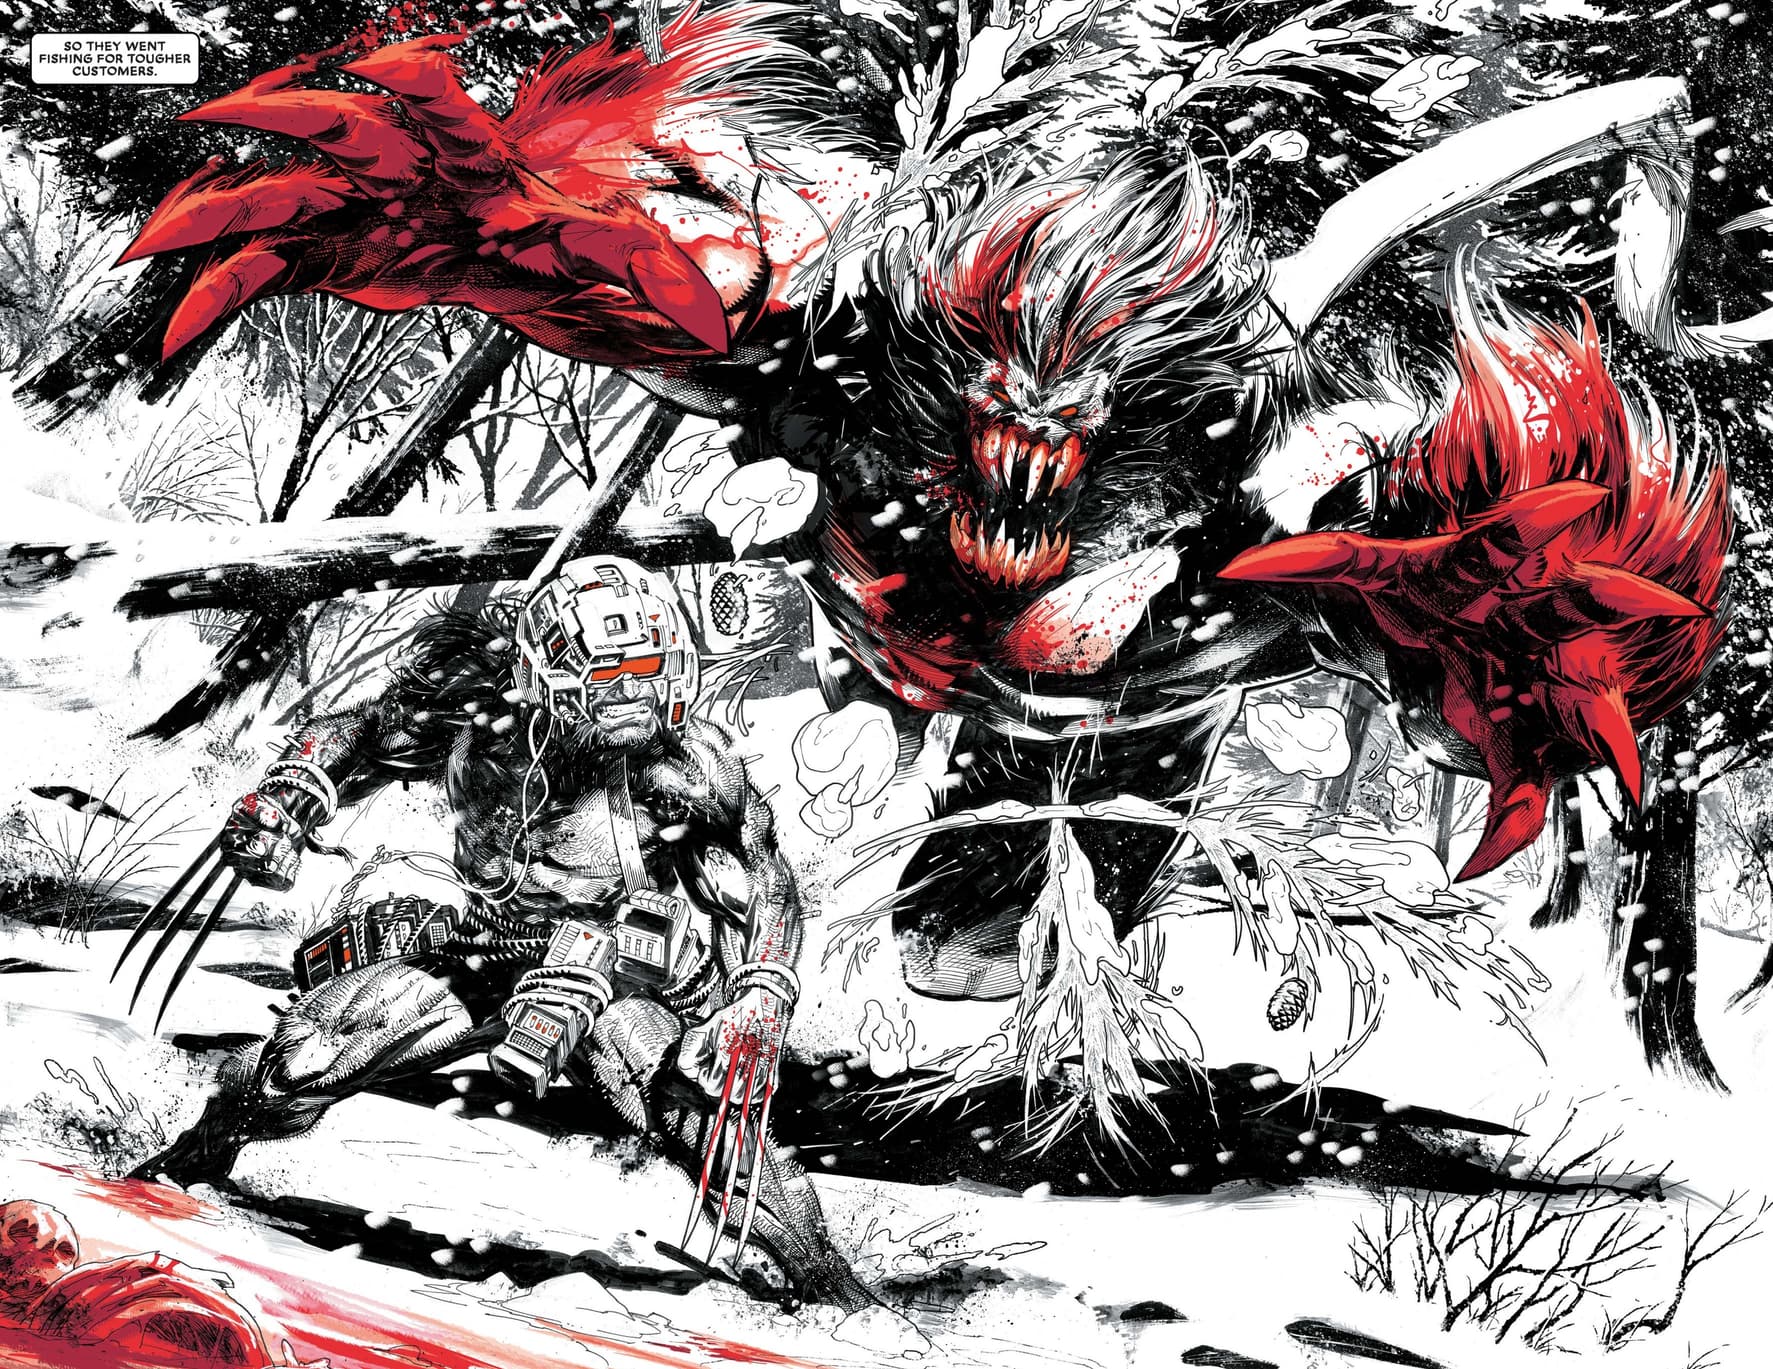 Logan cuts a swath in Black, White, and Blood.